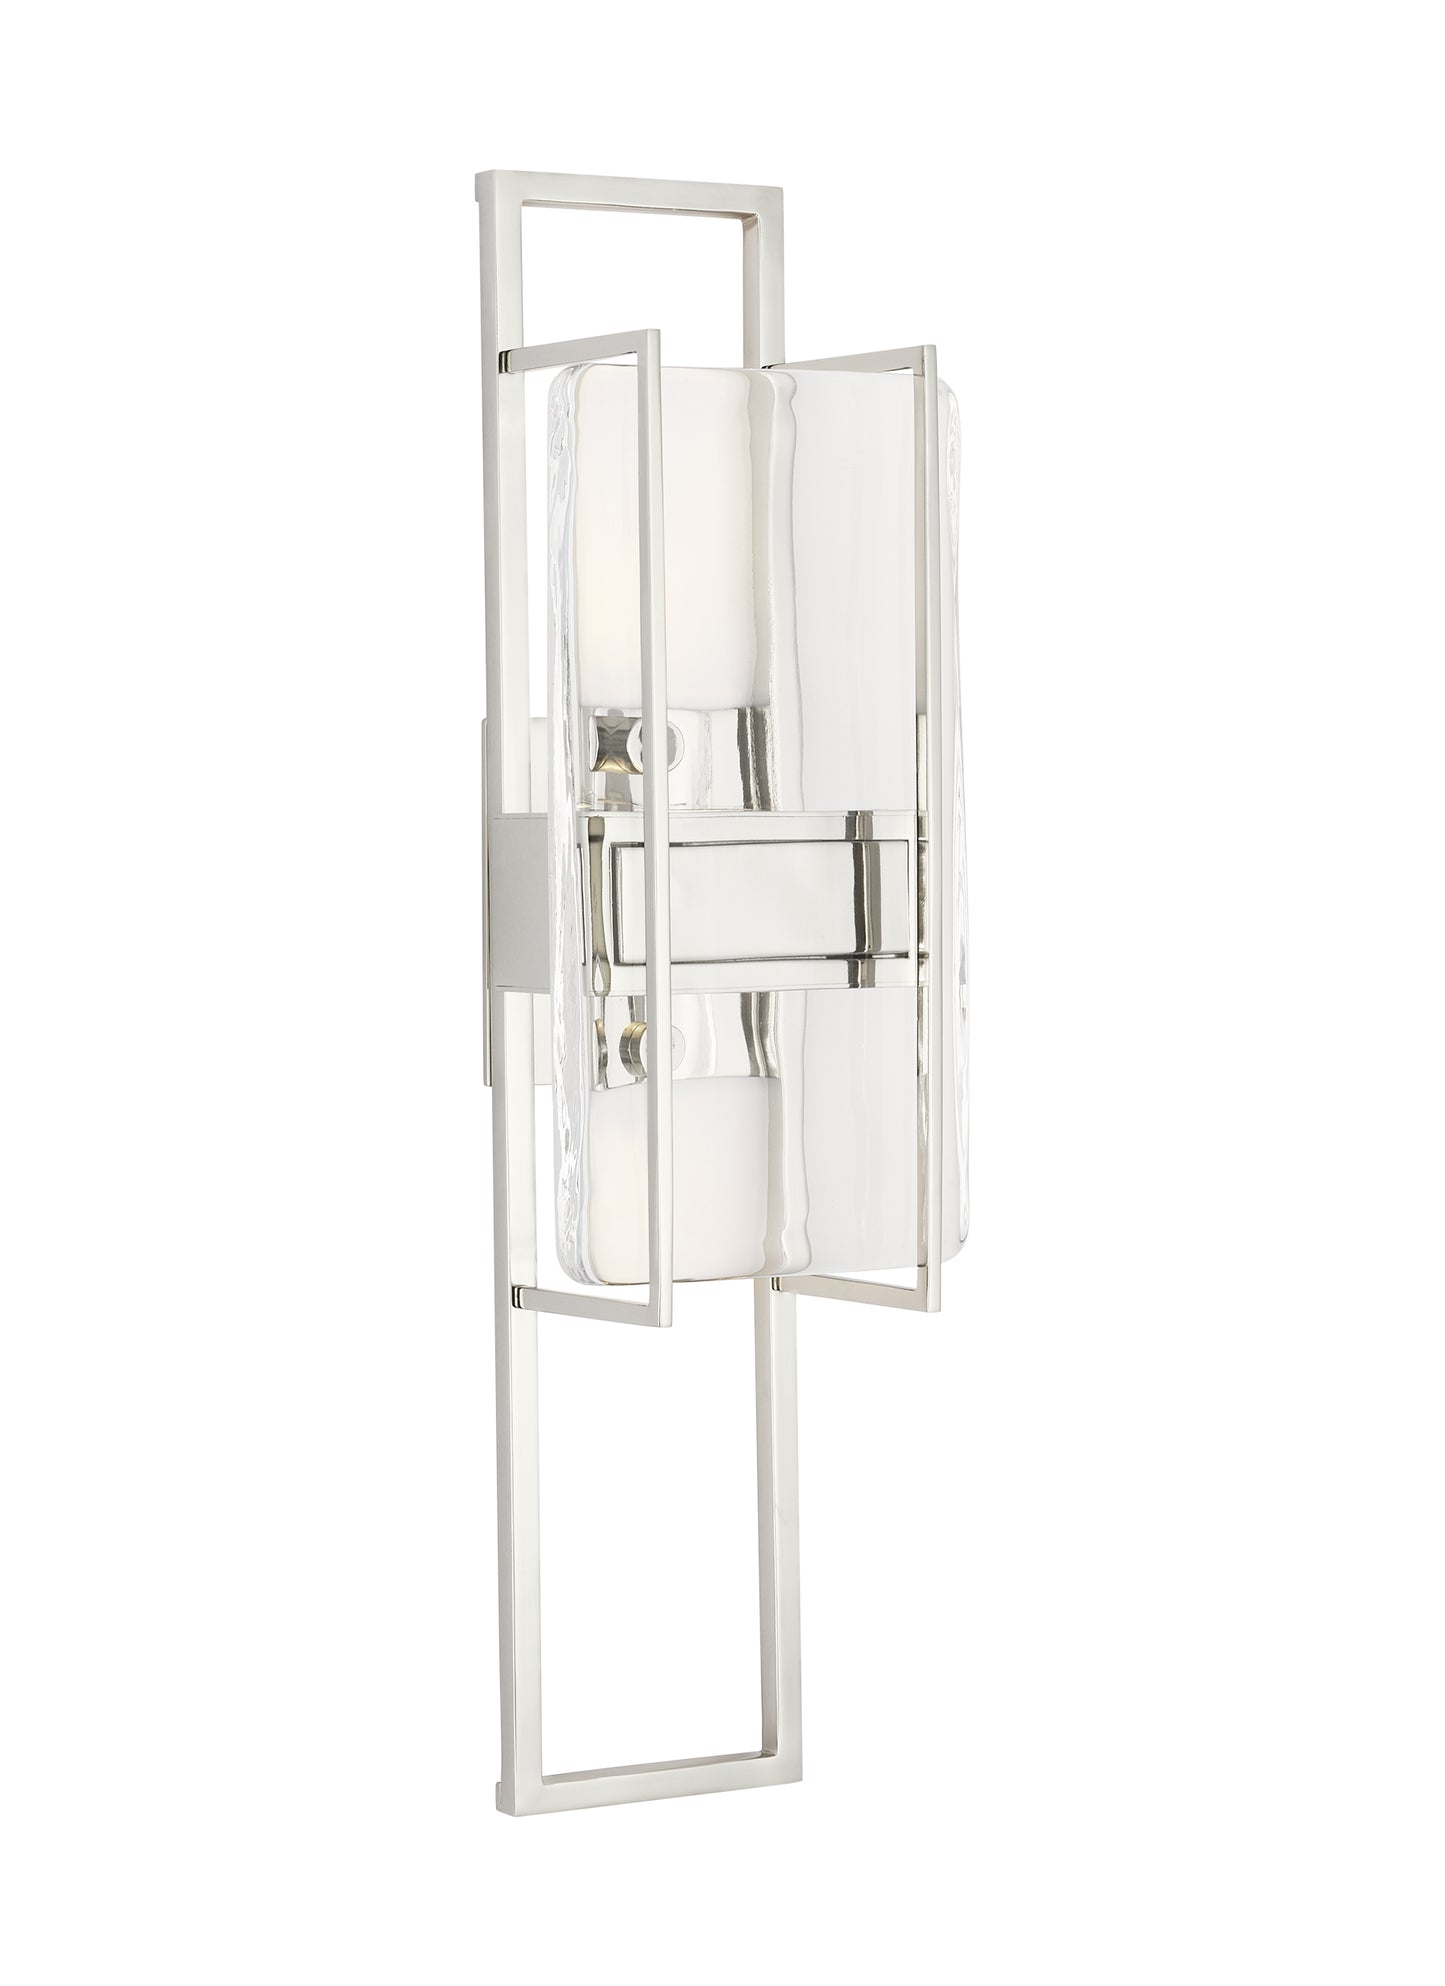 Duelle Medium Wall Sconce - Polished Nickel